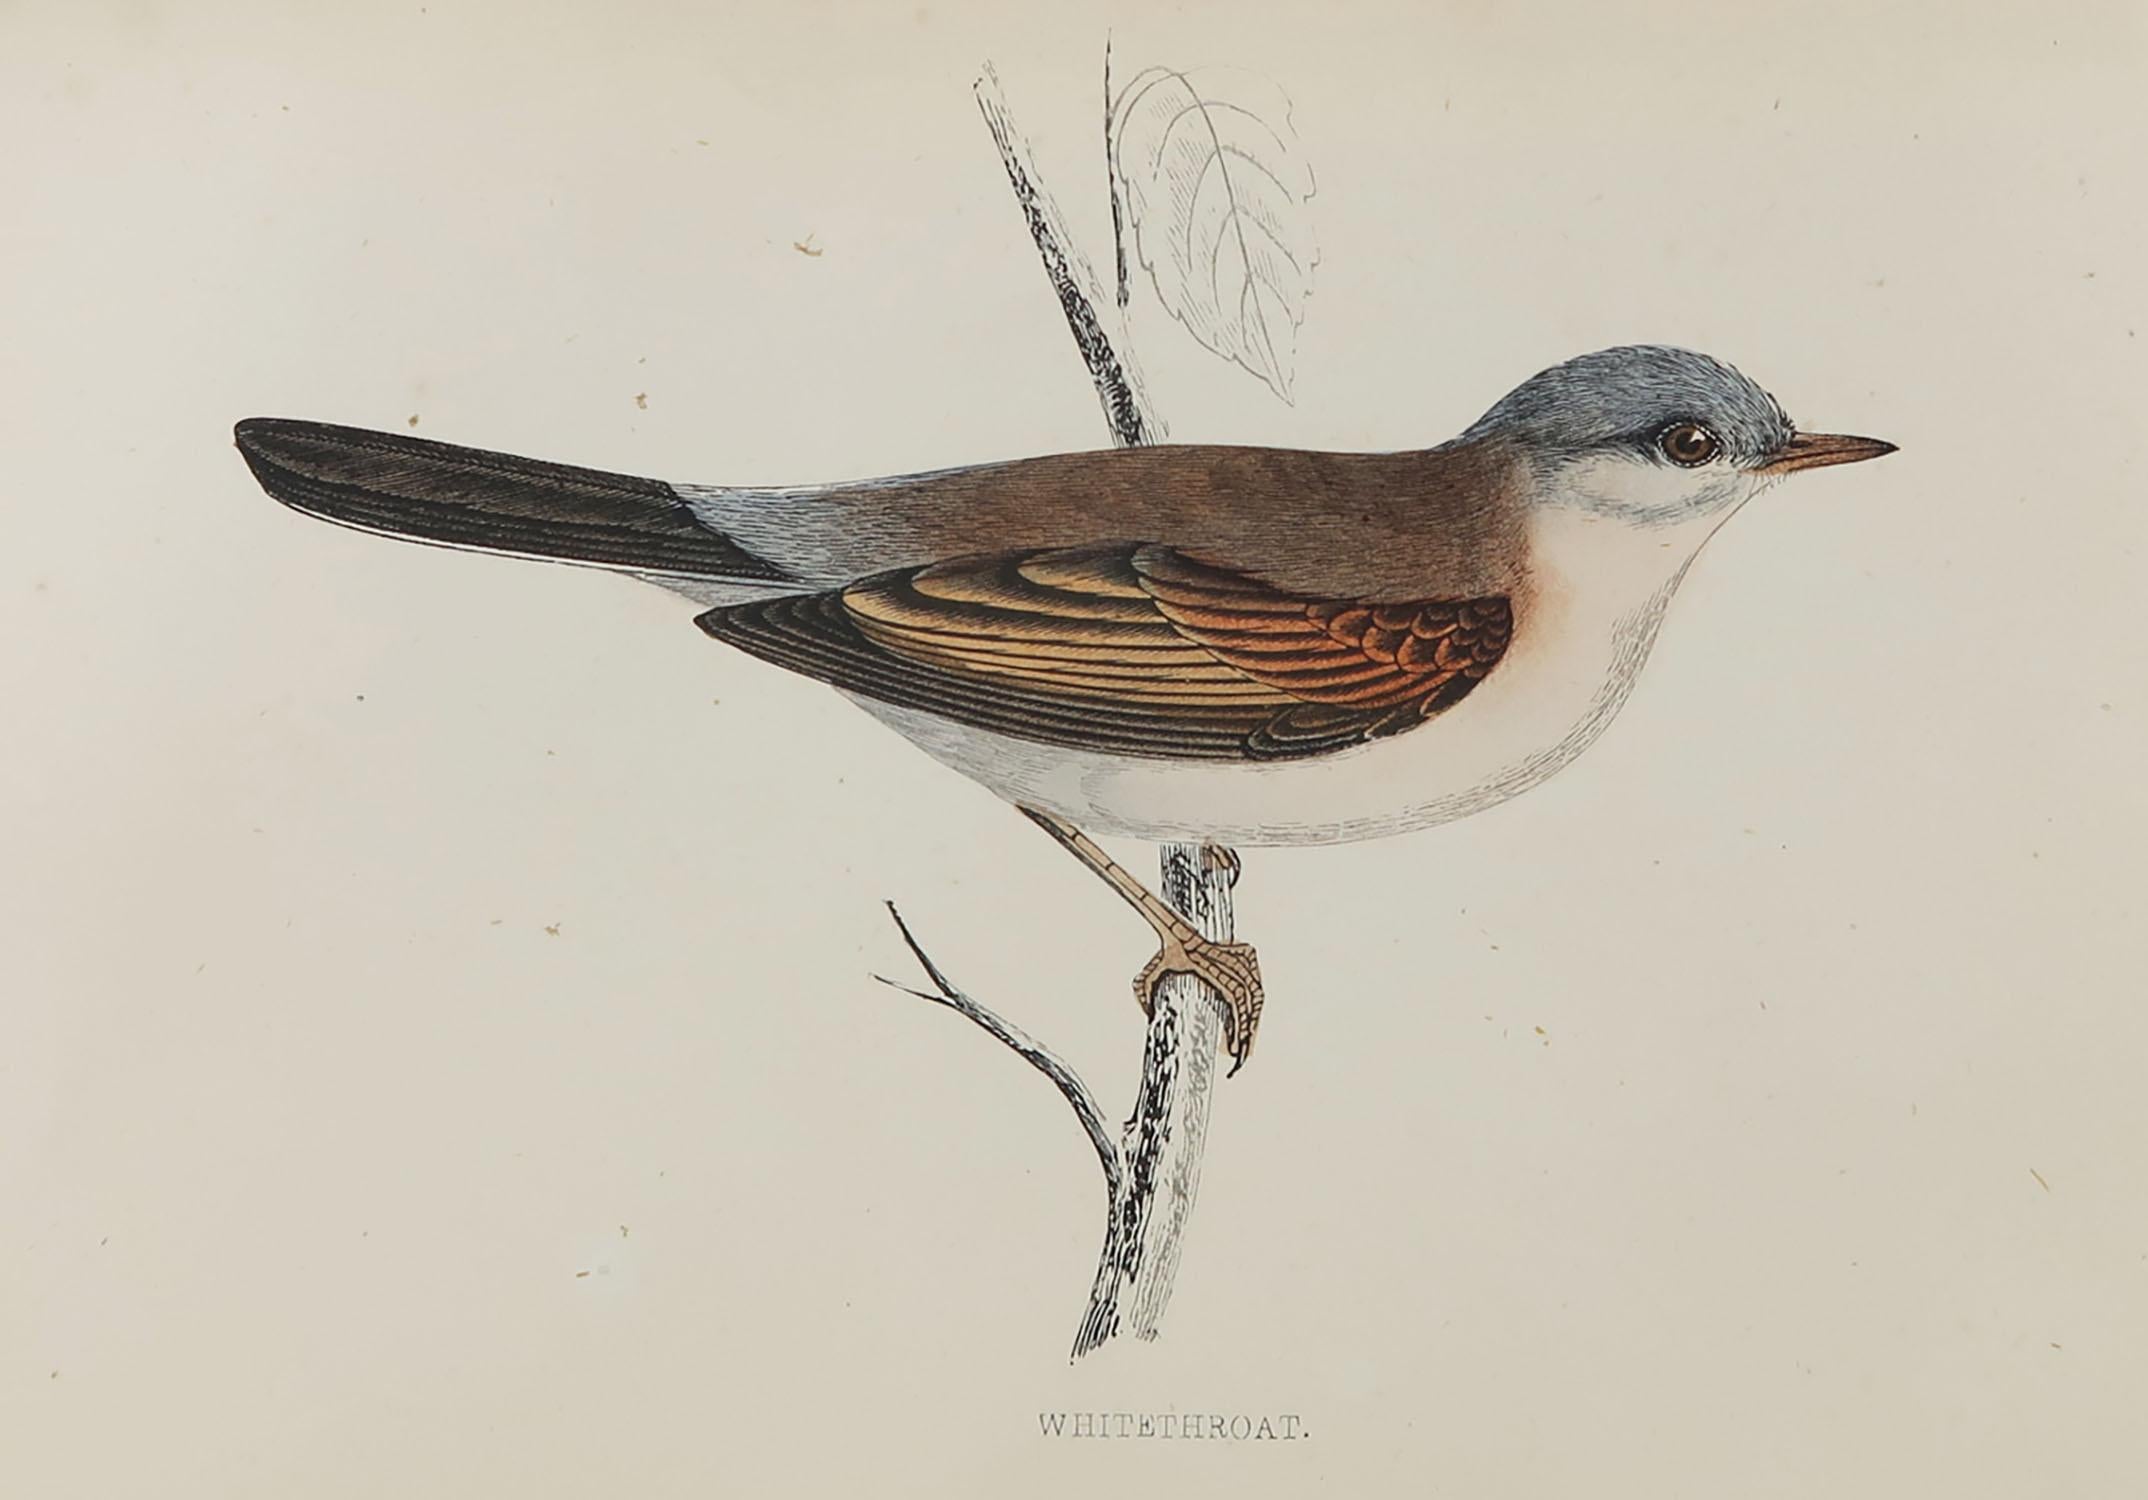 Great image of a whitethroat

Unframed. It gives you the option of perhaps making a set up using your own choice of frames.

Lithograph with original hand color.

Published, circa 1870

Free shipping.




